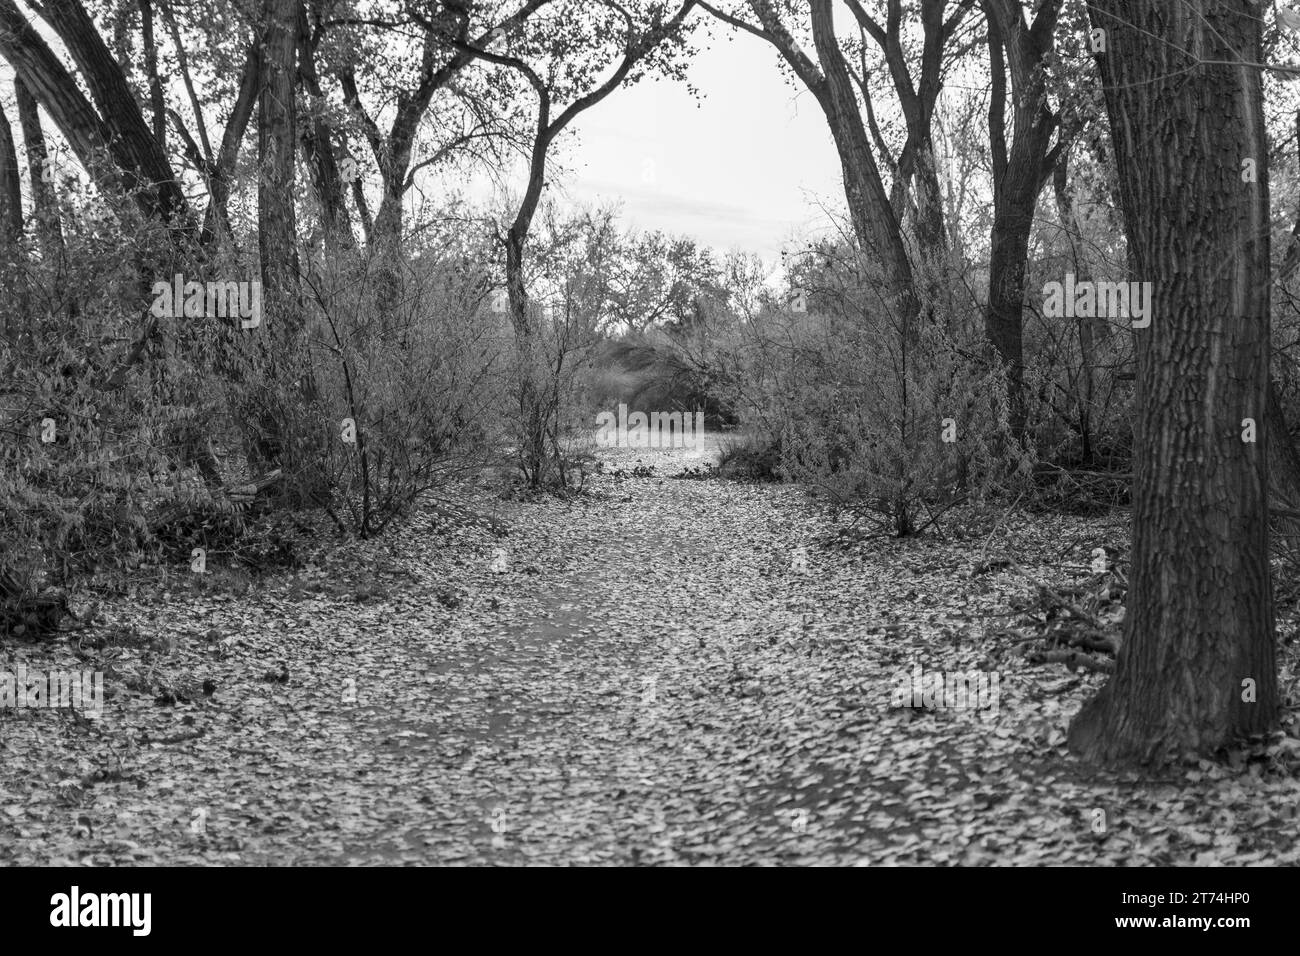 Black and white image of a forest path covered in fallen leaves, trees and bushes line the trail until it opens into a clearing in the distance. Stock Photo